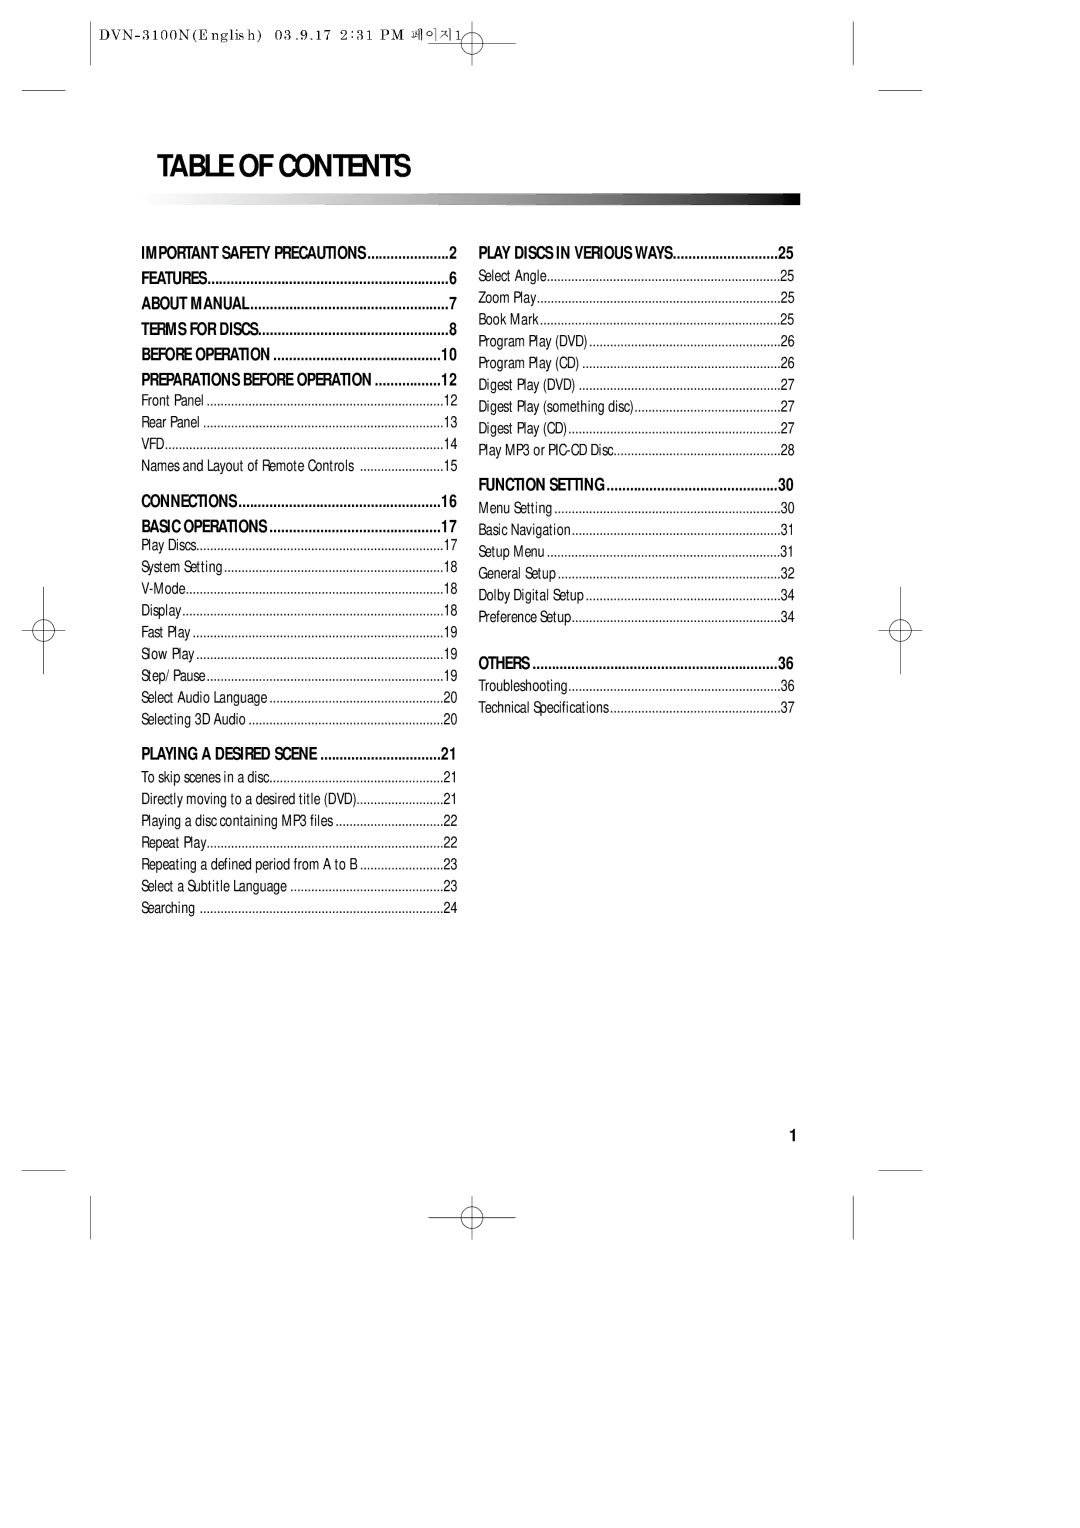 Daewoo DVN-3100N owner manual Table of Contents 